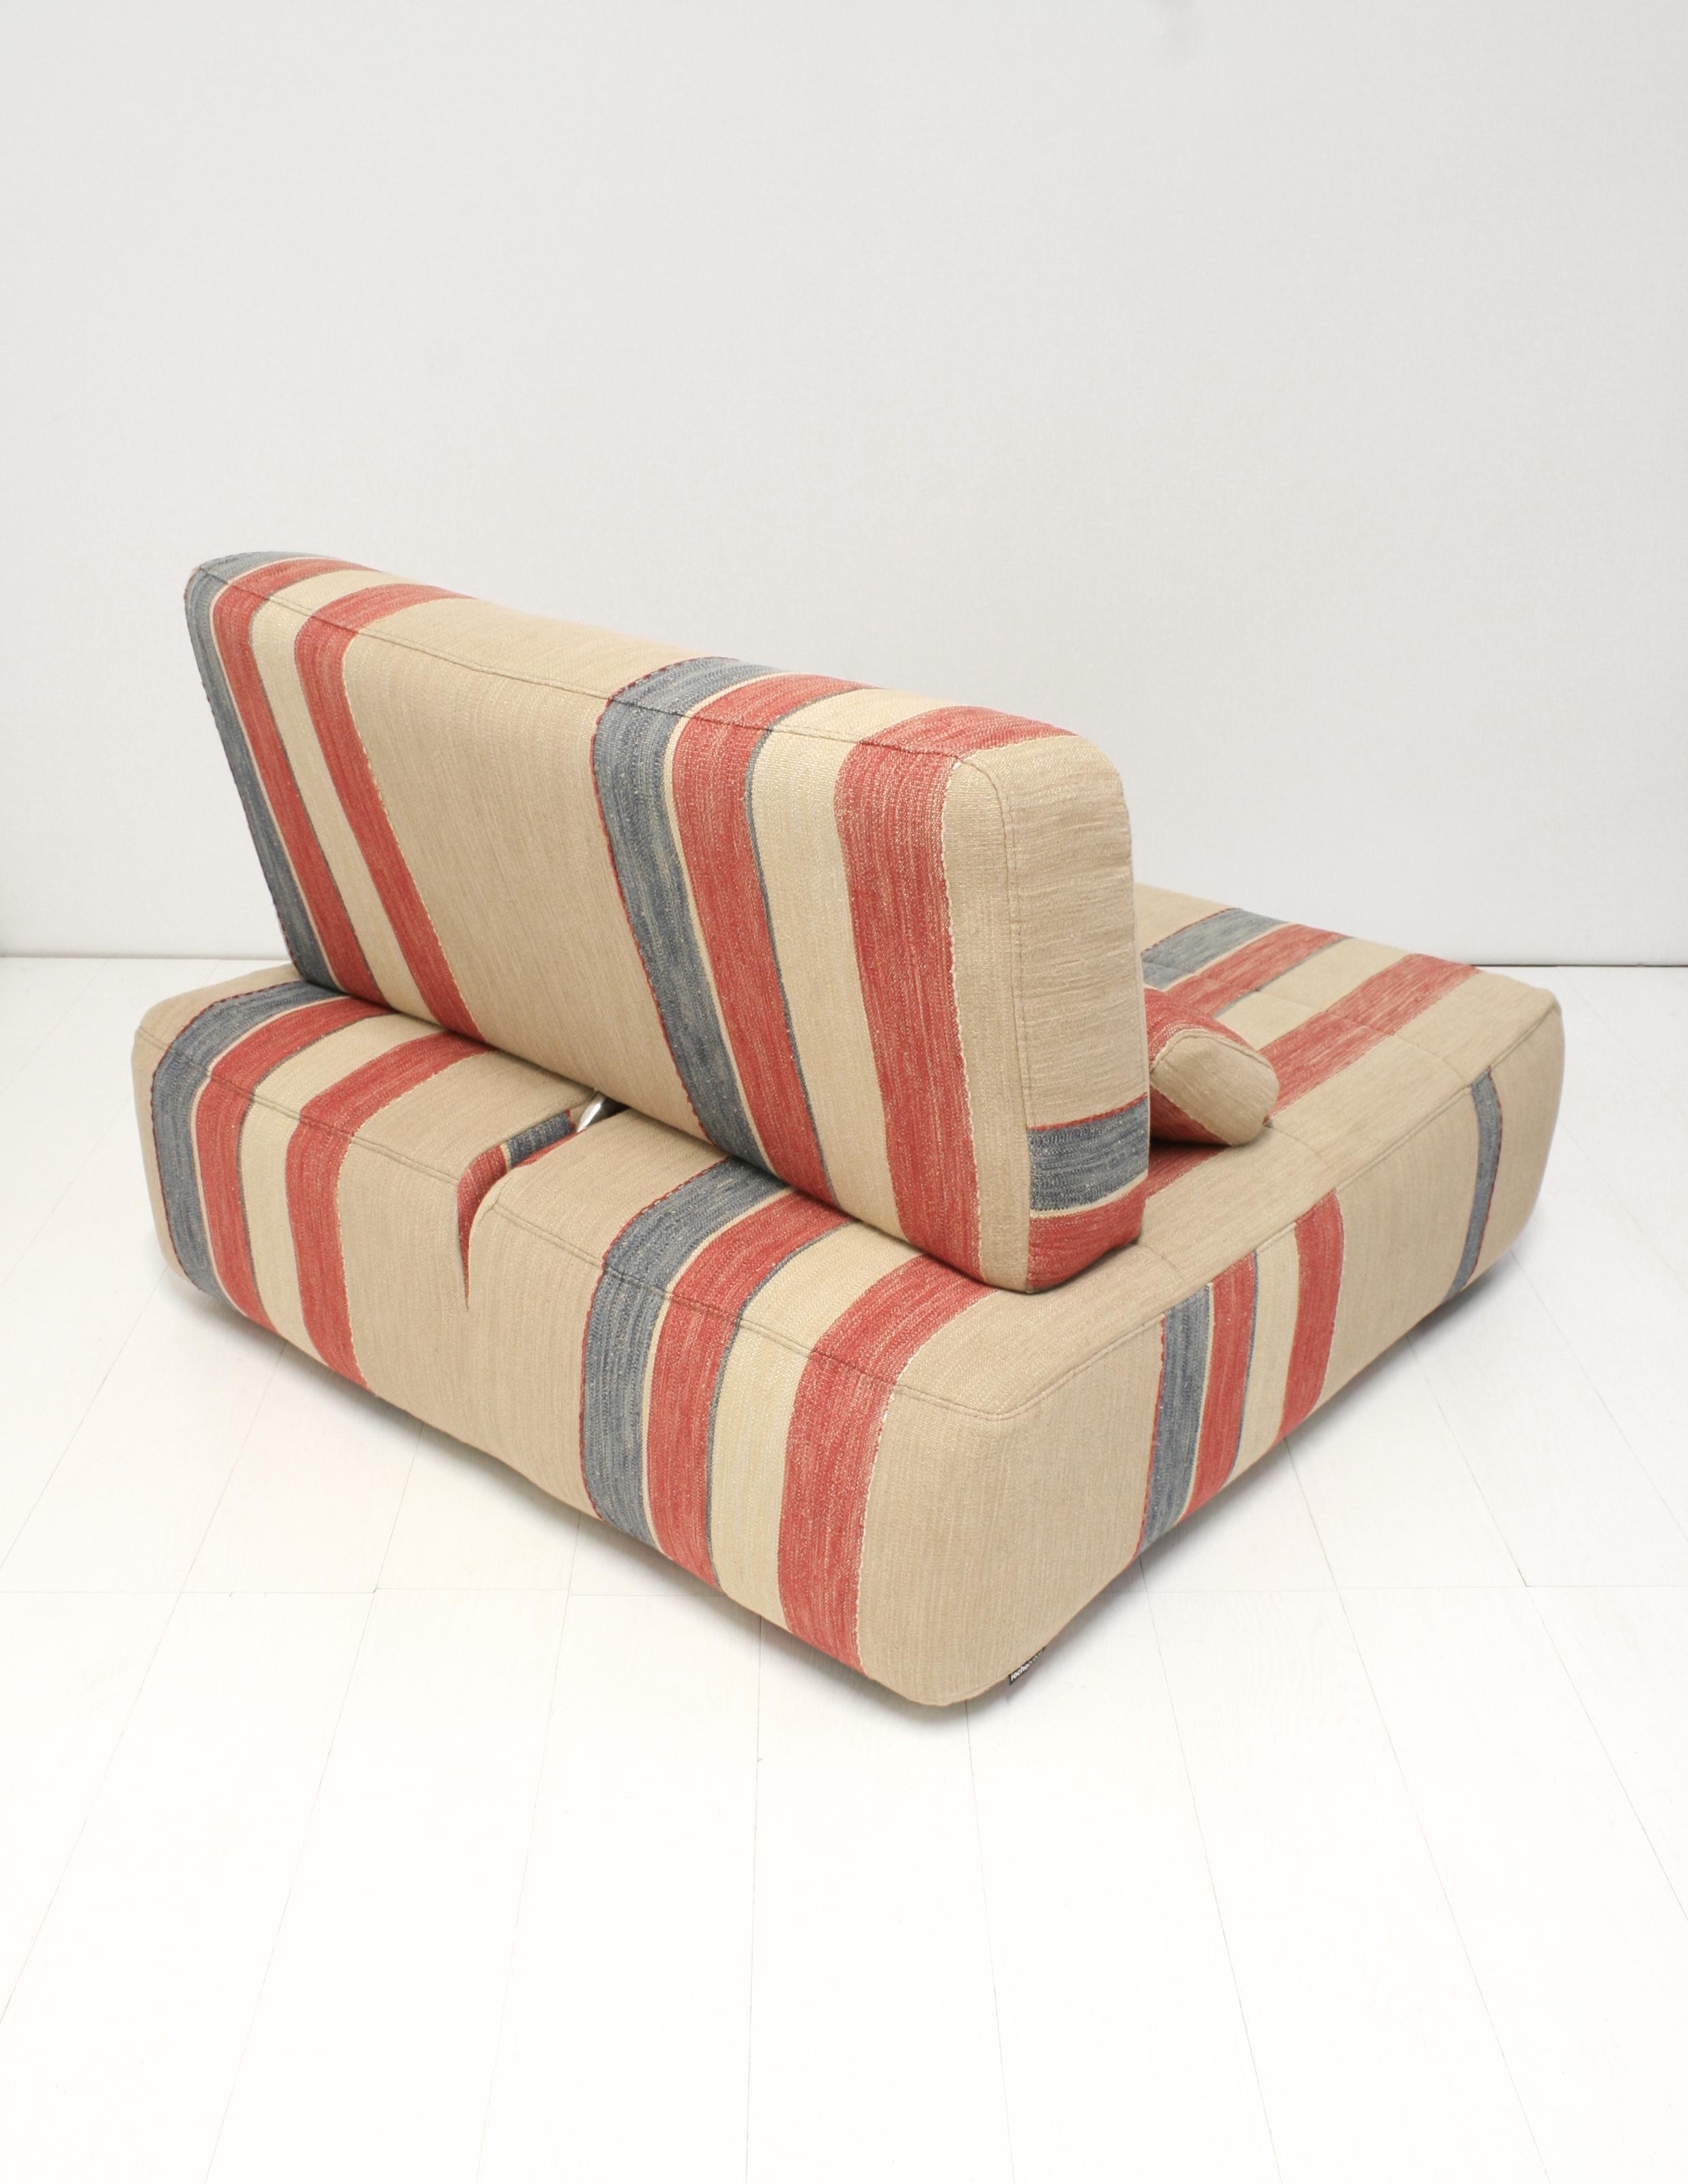 Modular Parcours Voyage Immobile Fabric Sofa by Sacha Lakic for Roche Bobois 13